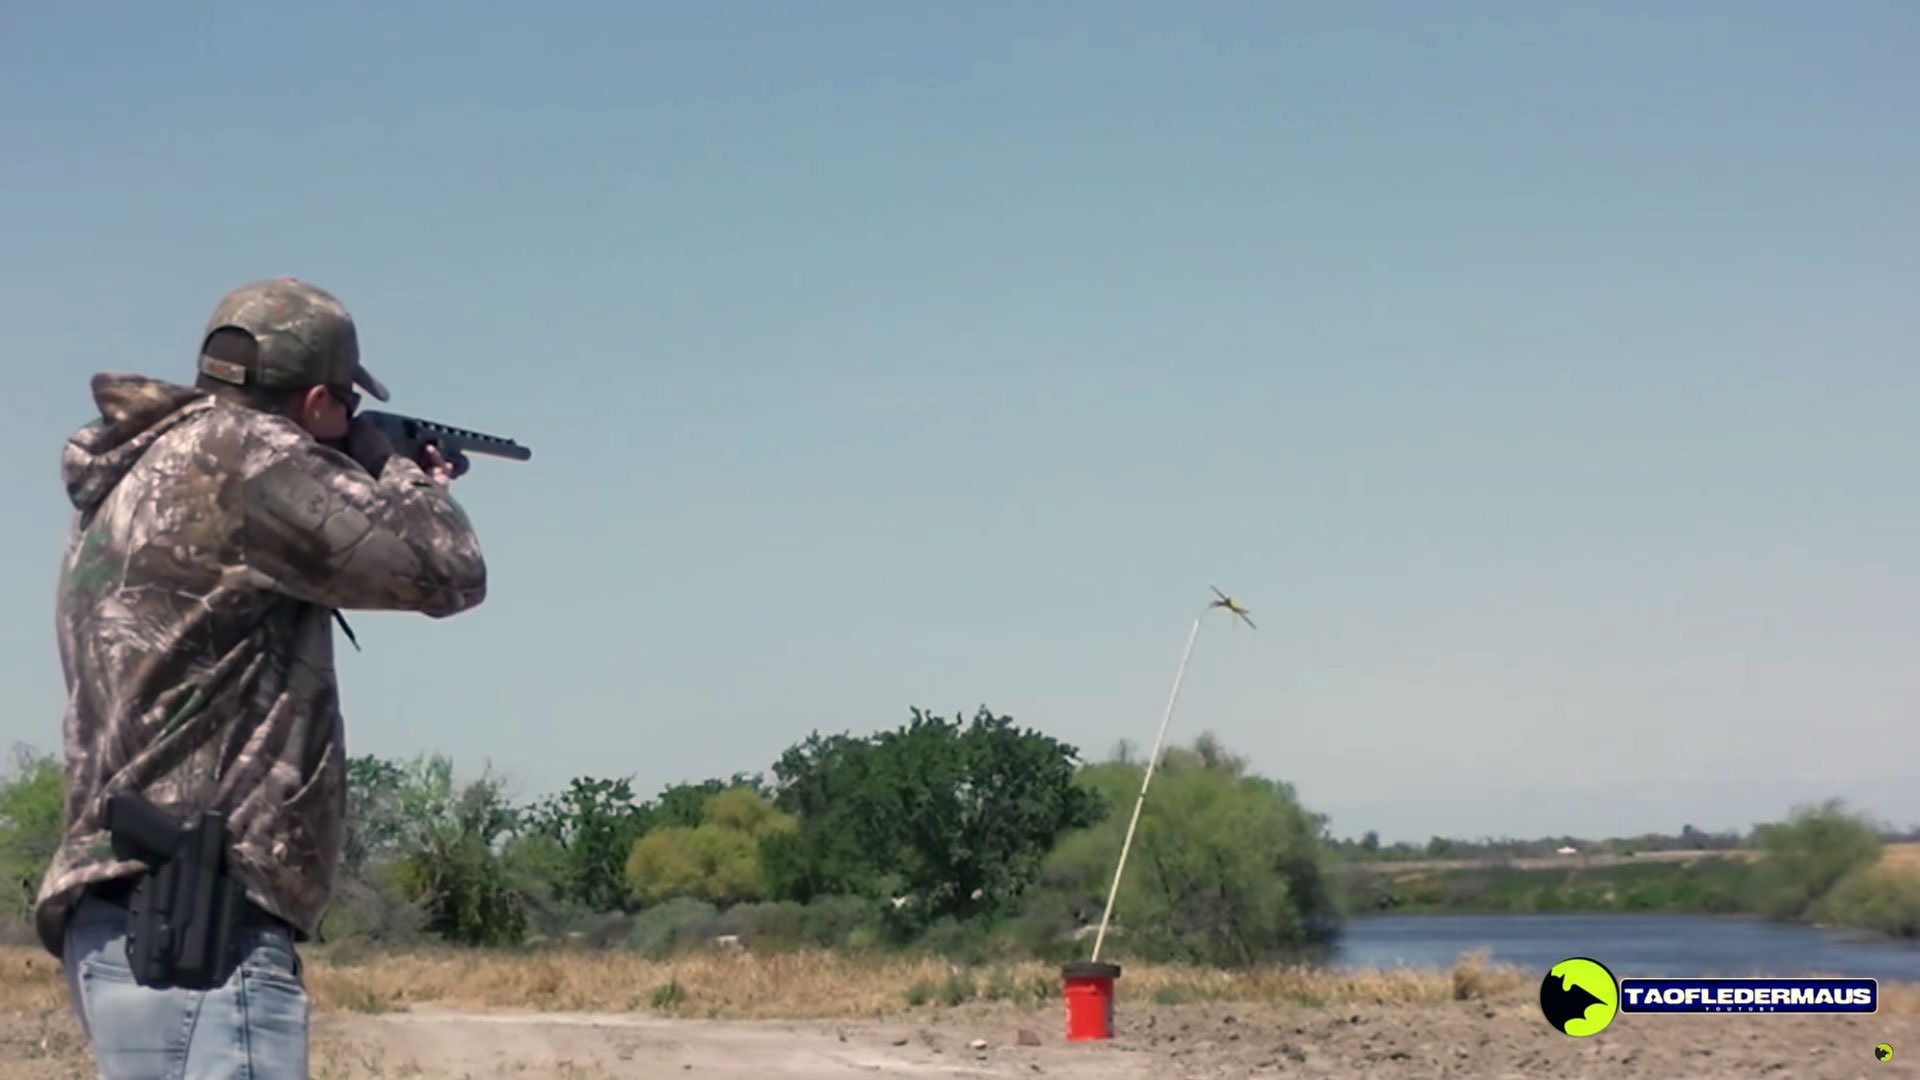 Drone defense shotgun shells tested in action | DRONEALITY